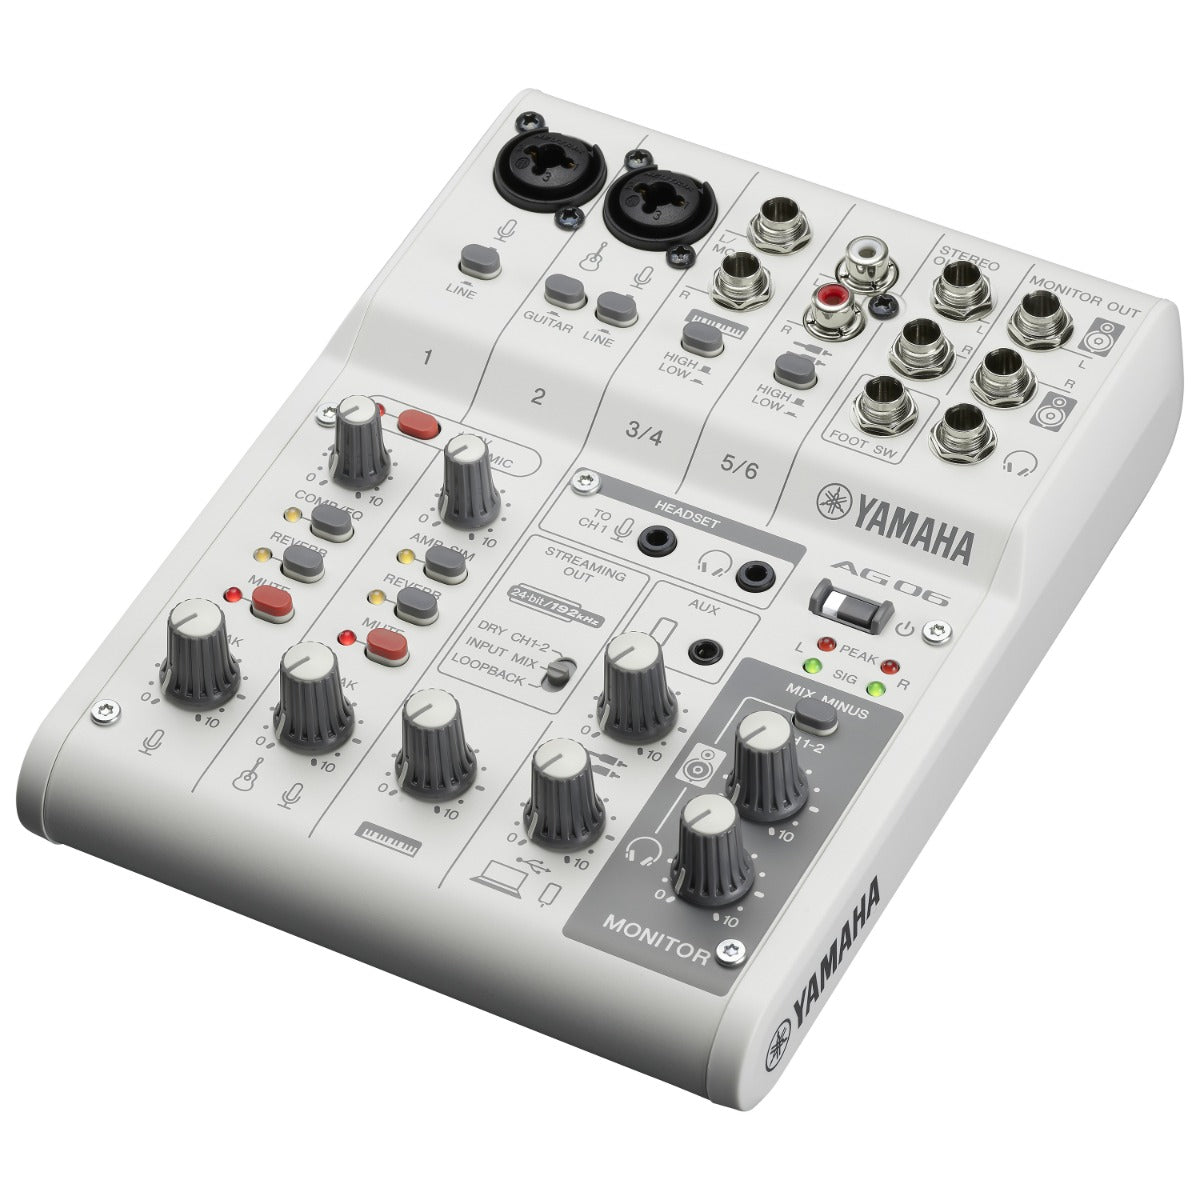 Yamaha AG06 Mk2 Live Streaming Mixer and USB Audio Interface - White view 1